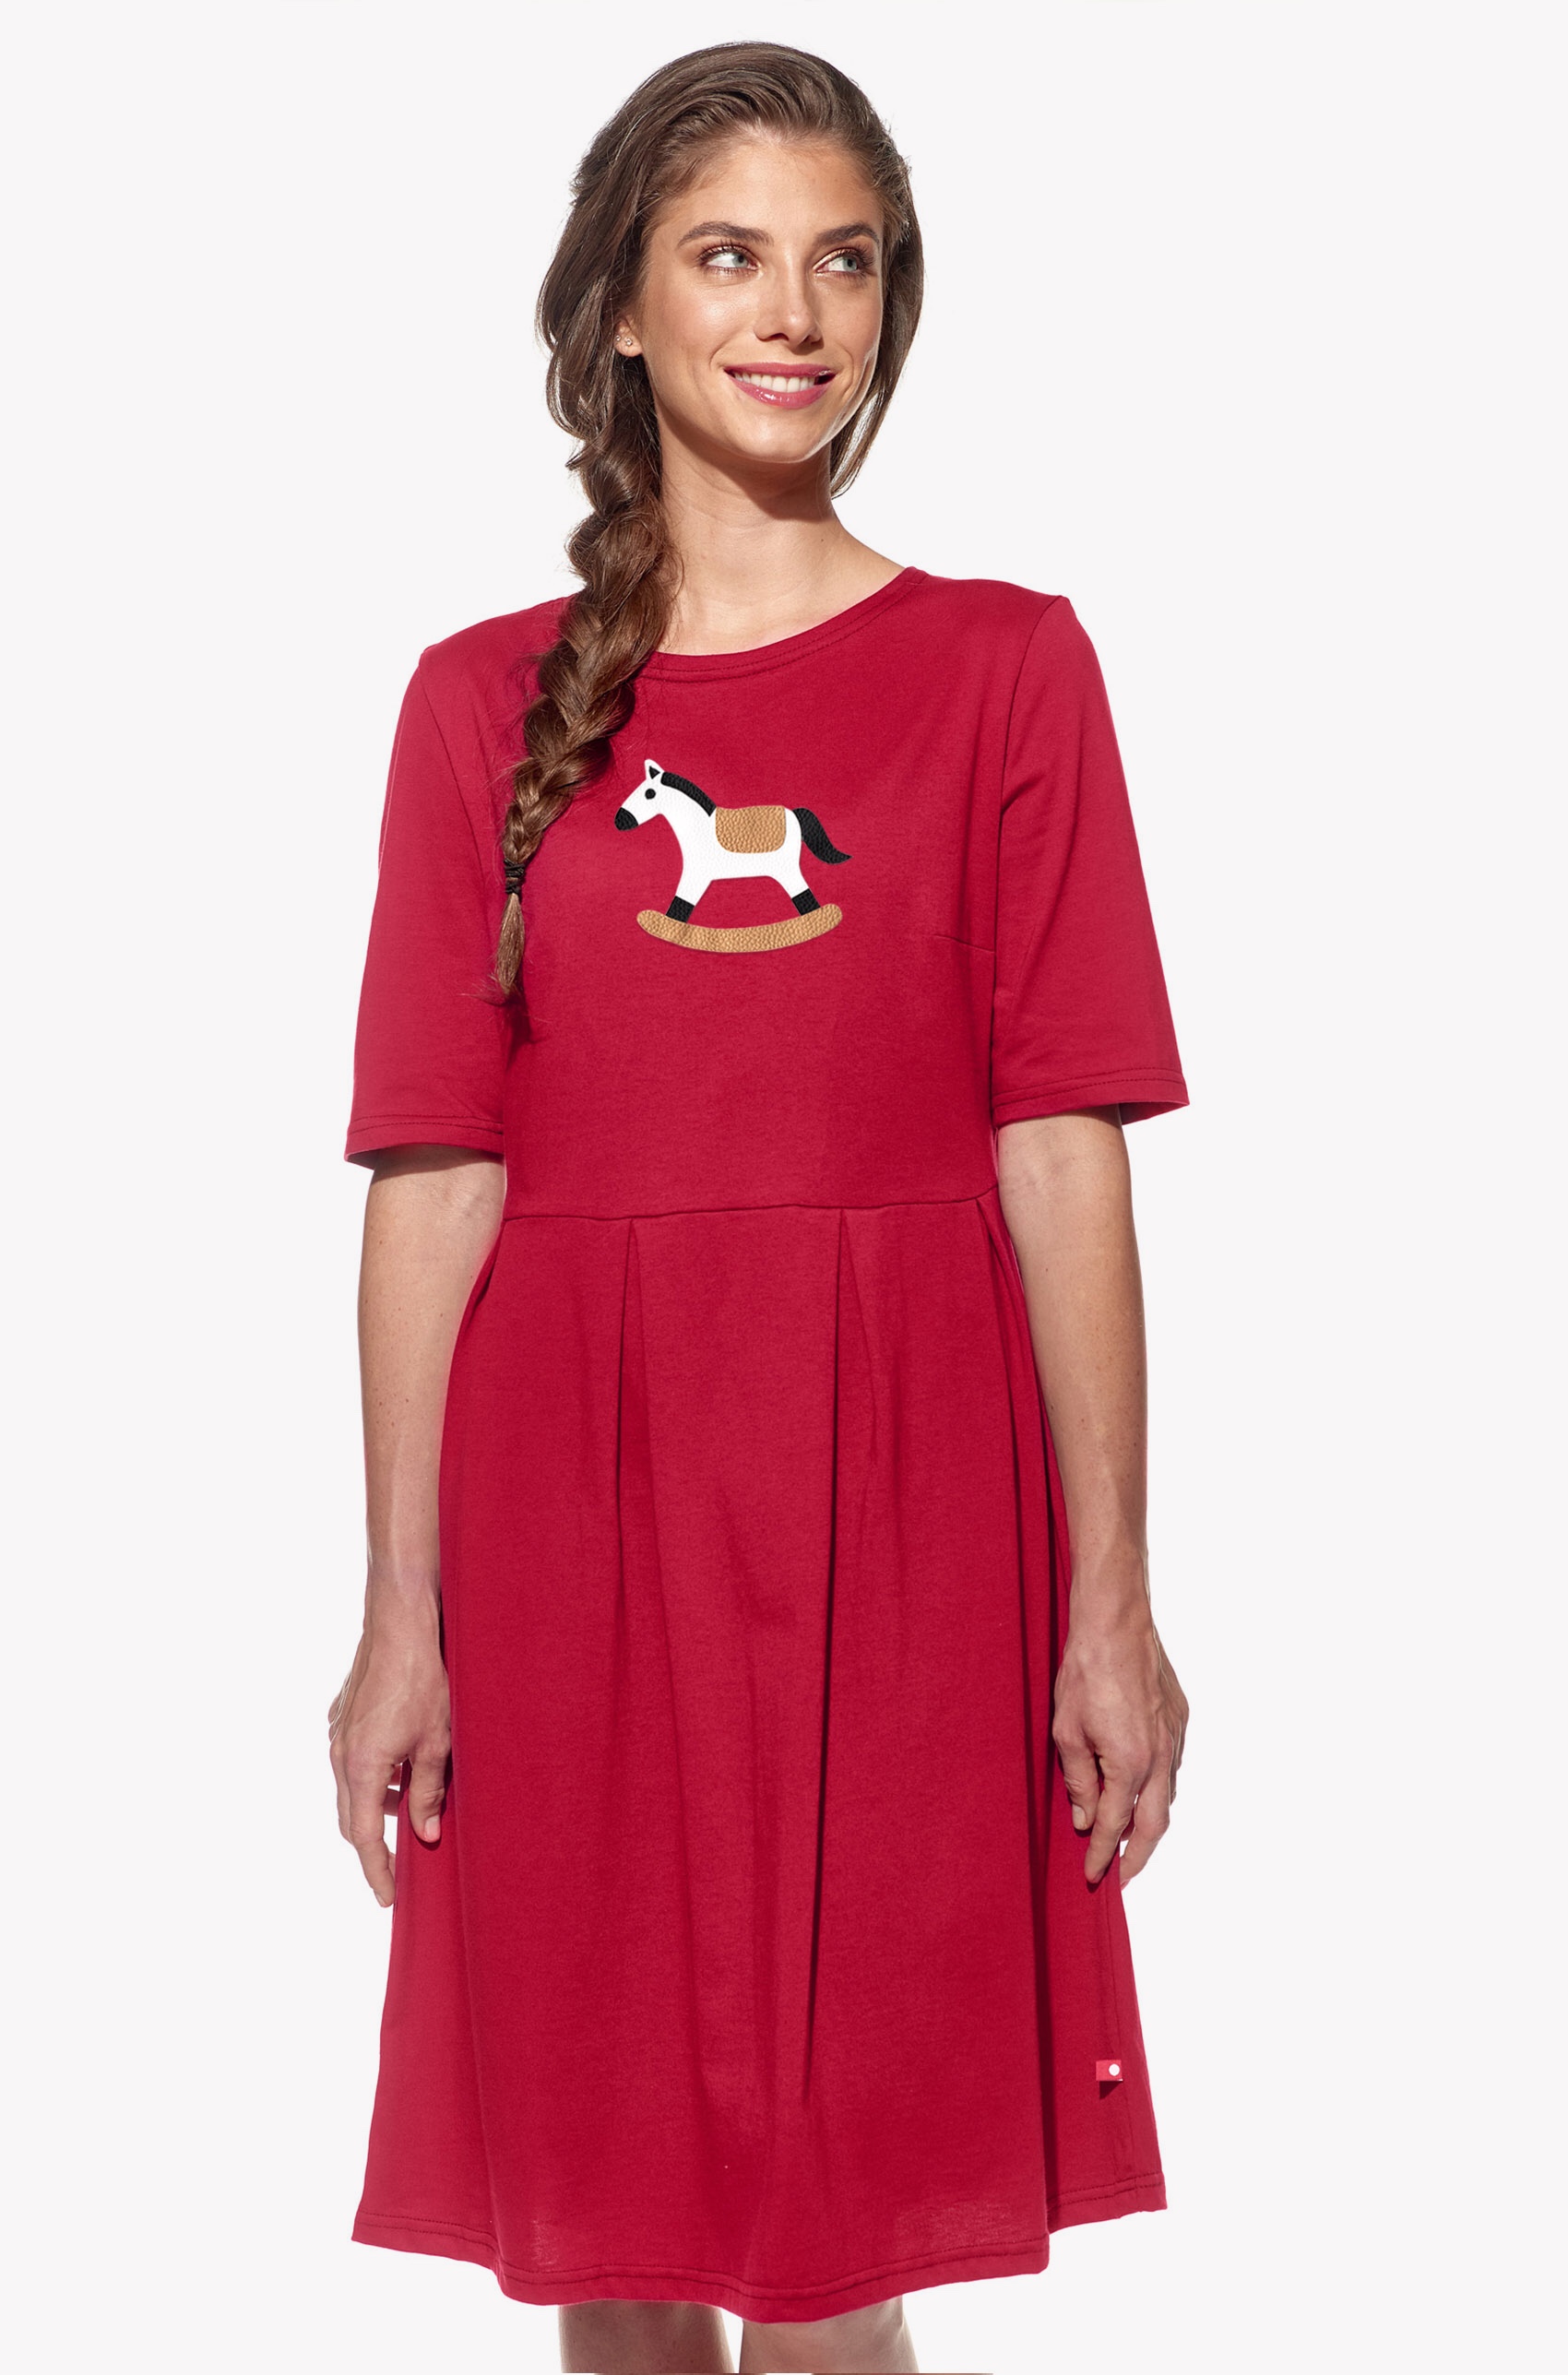 Dresses with rocking horse